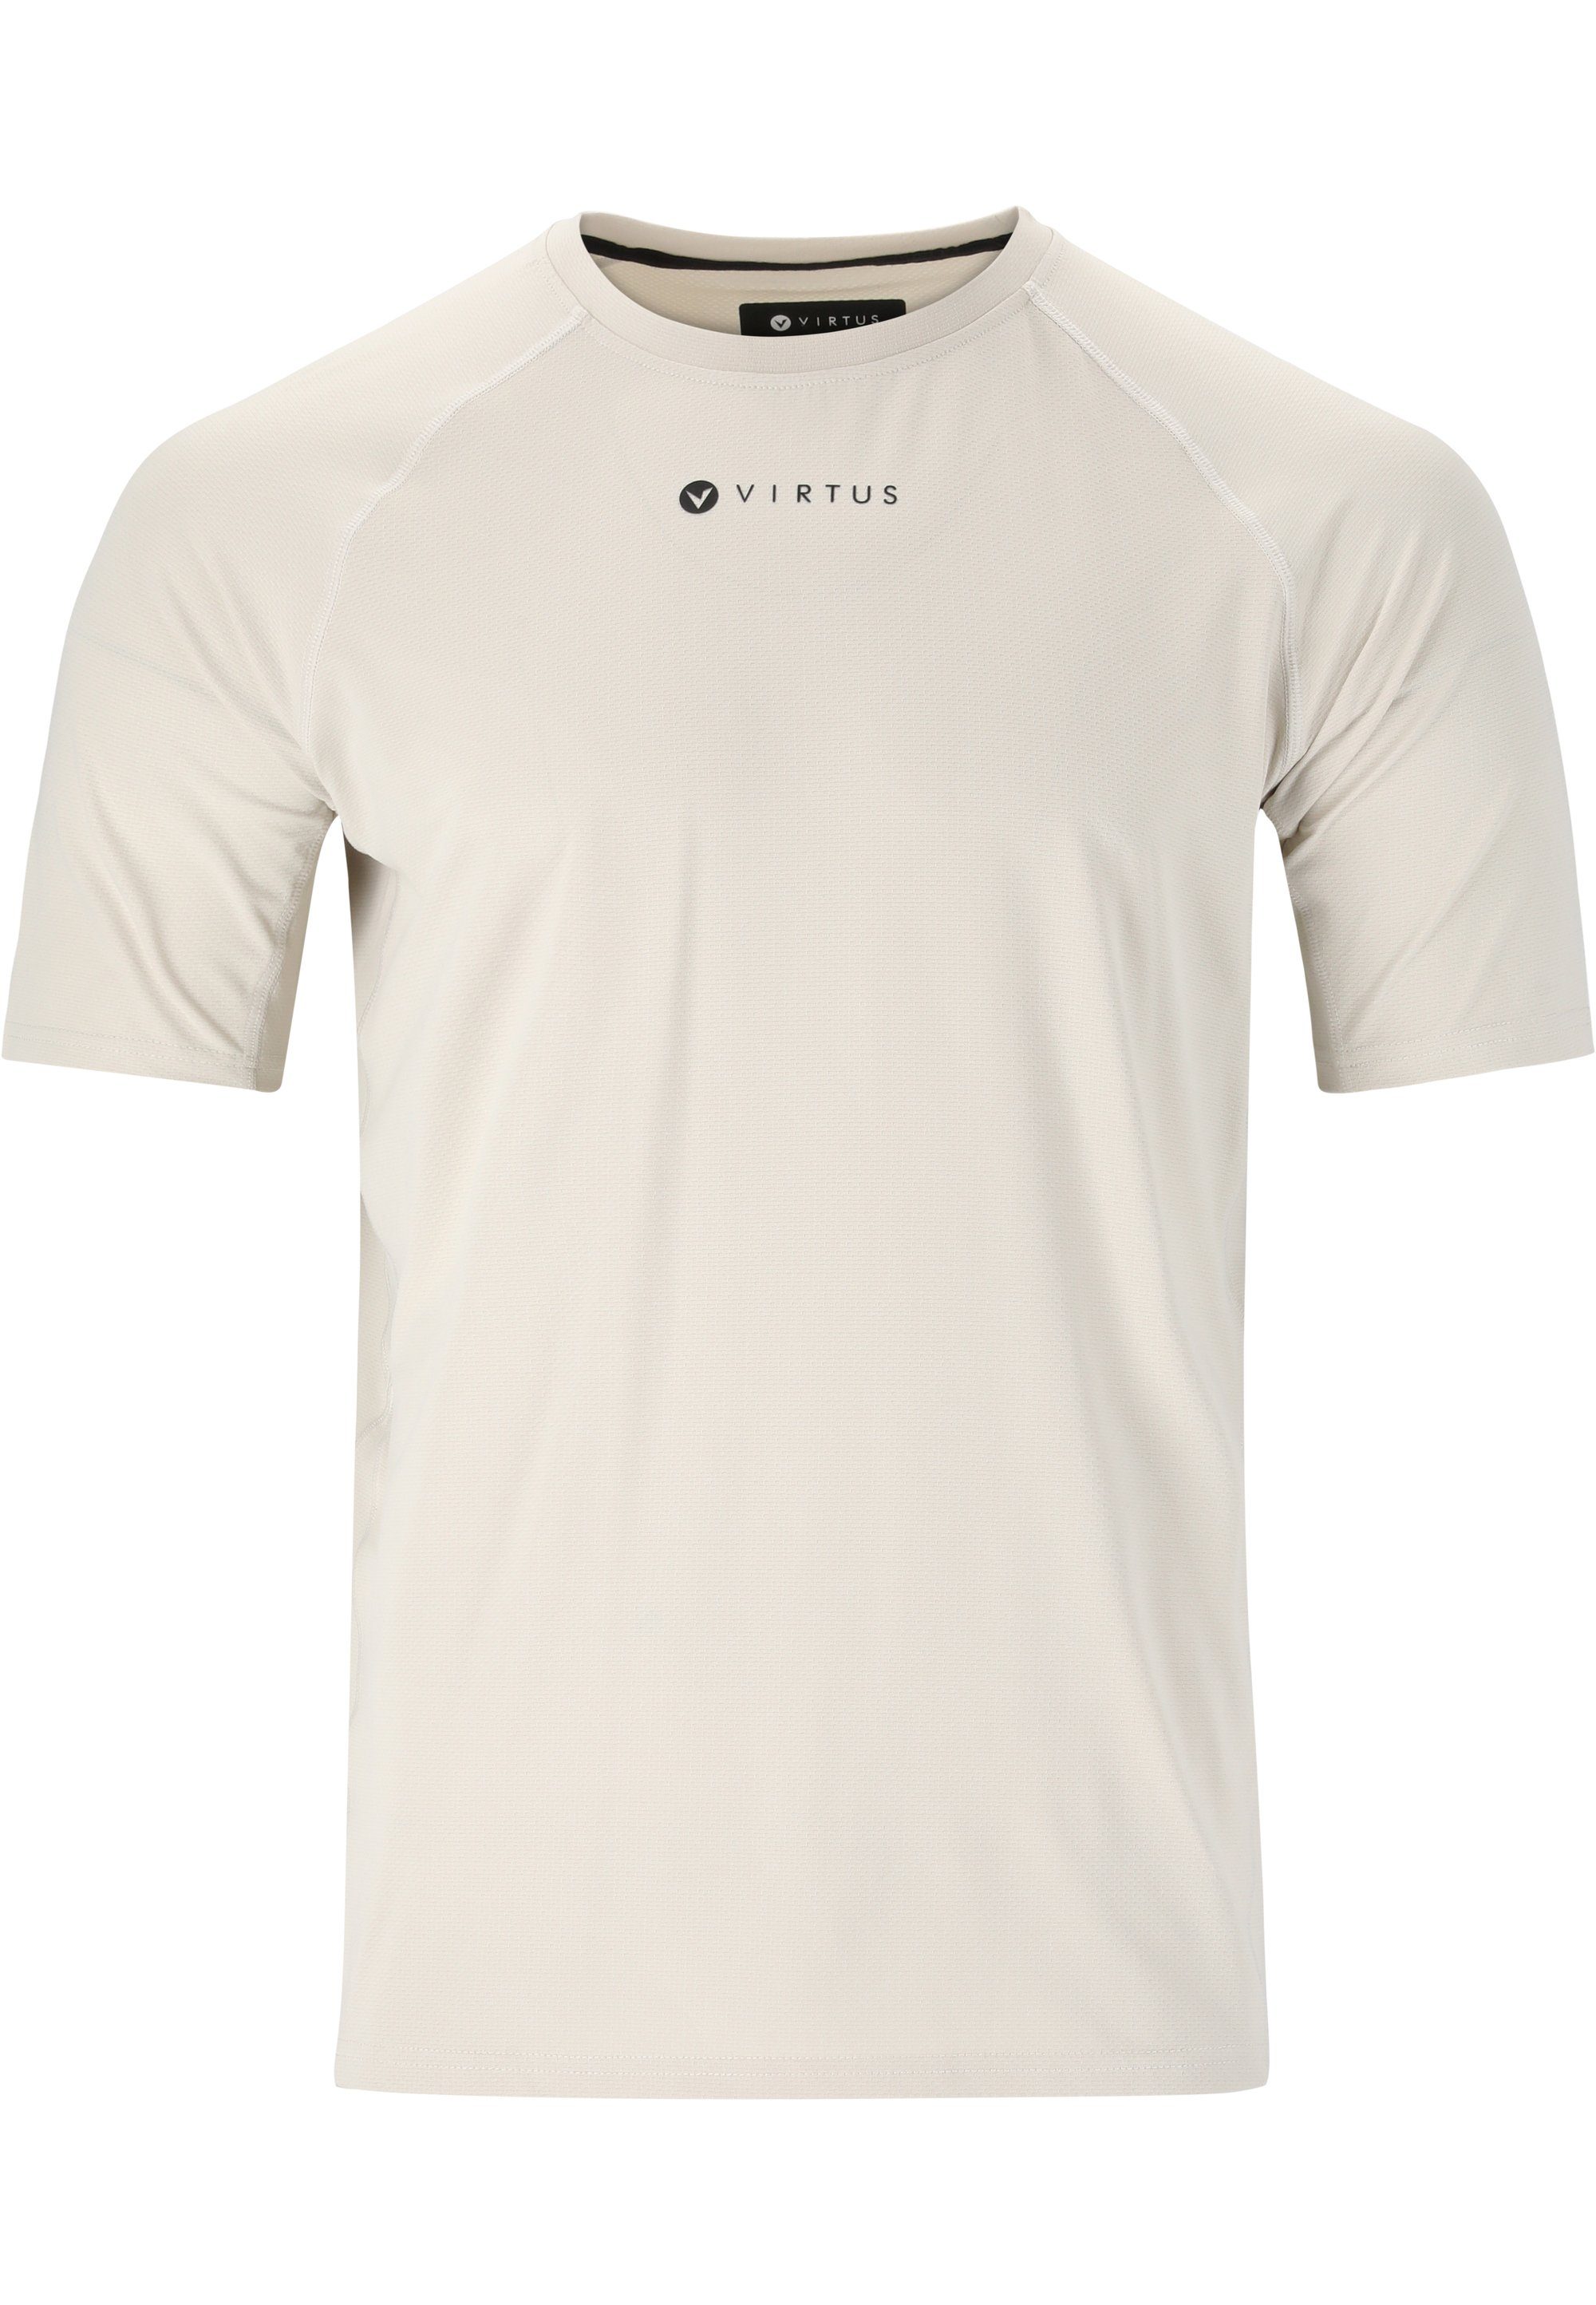 Toscan Muskelshirt Virtus Silver+-Technologie offwhite mit (1-tlg)